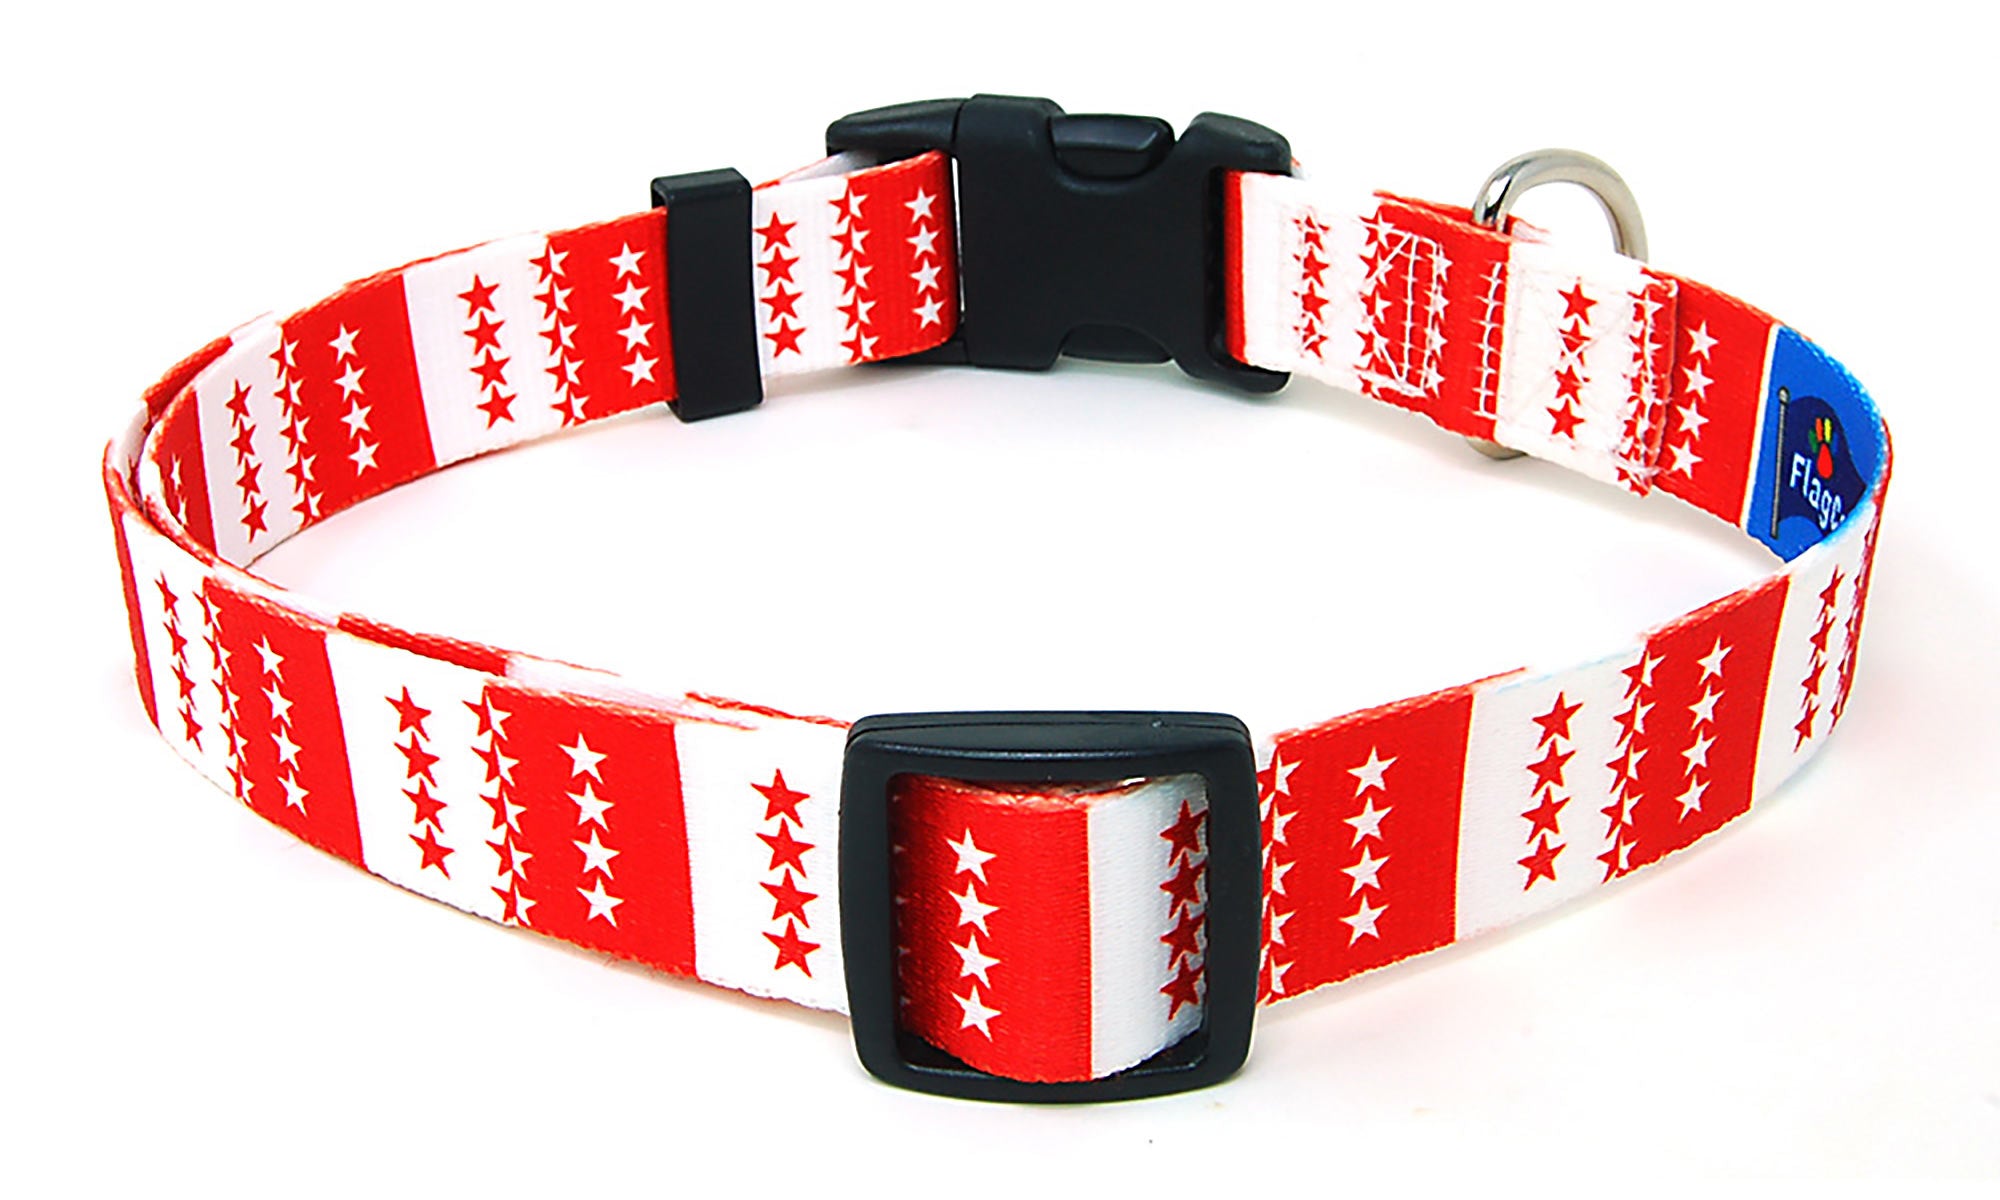 Valais Dog Collar | Quick Release or Martingale Style | Made in NJ, USA